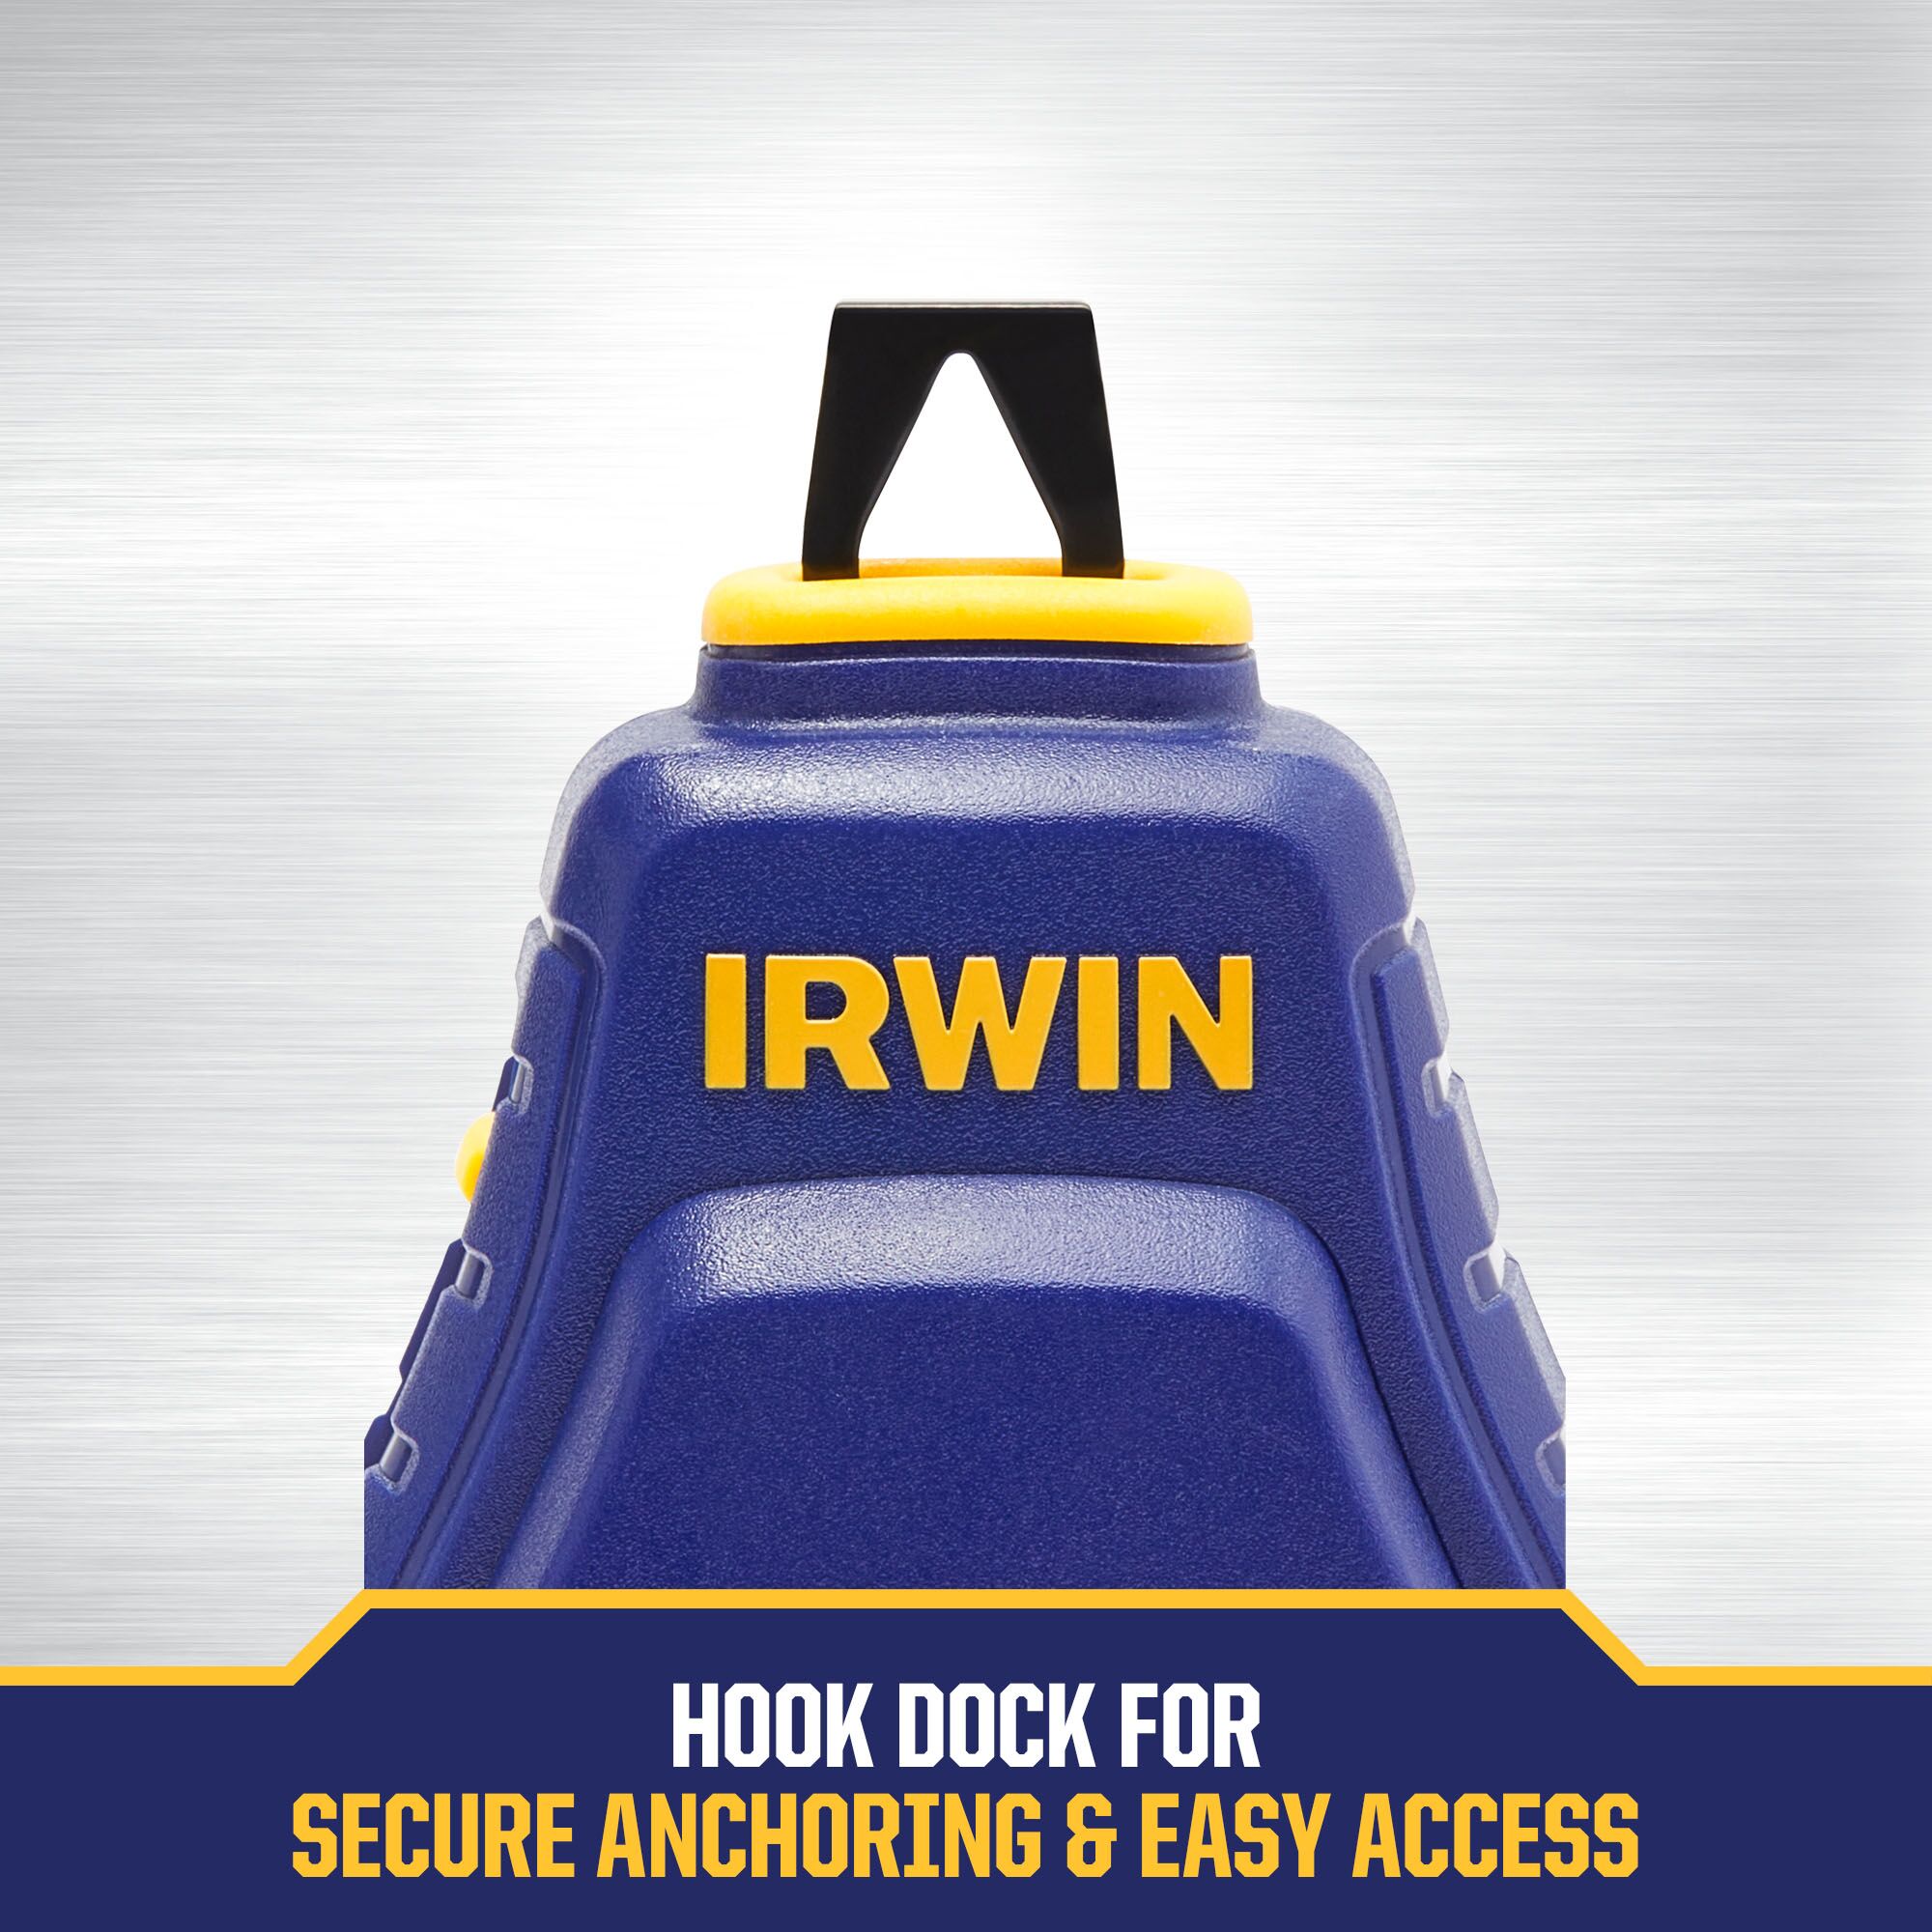 IRWIN STRAIT-LINE 3:1 100-ft Chalk Reel in the Chalk Reels department at